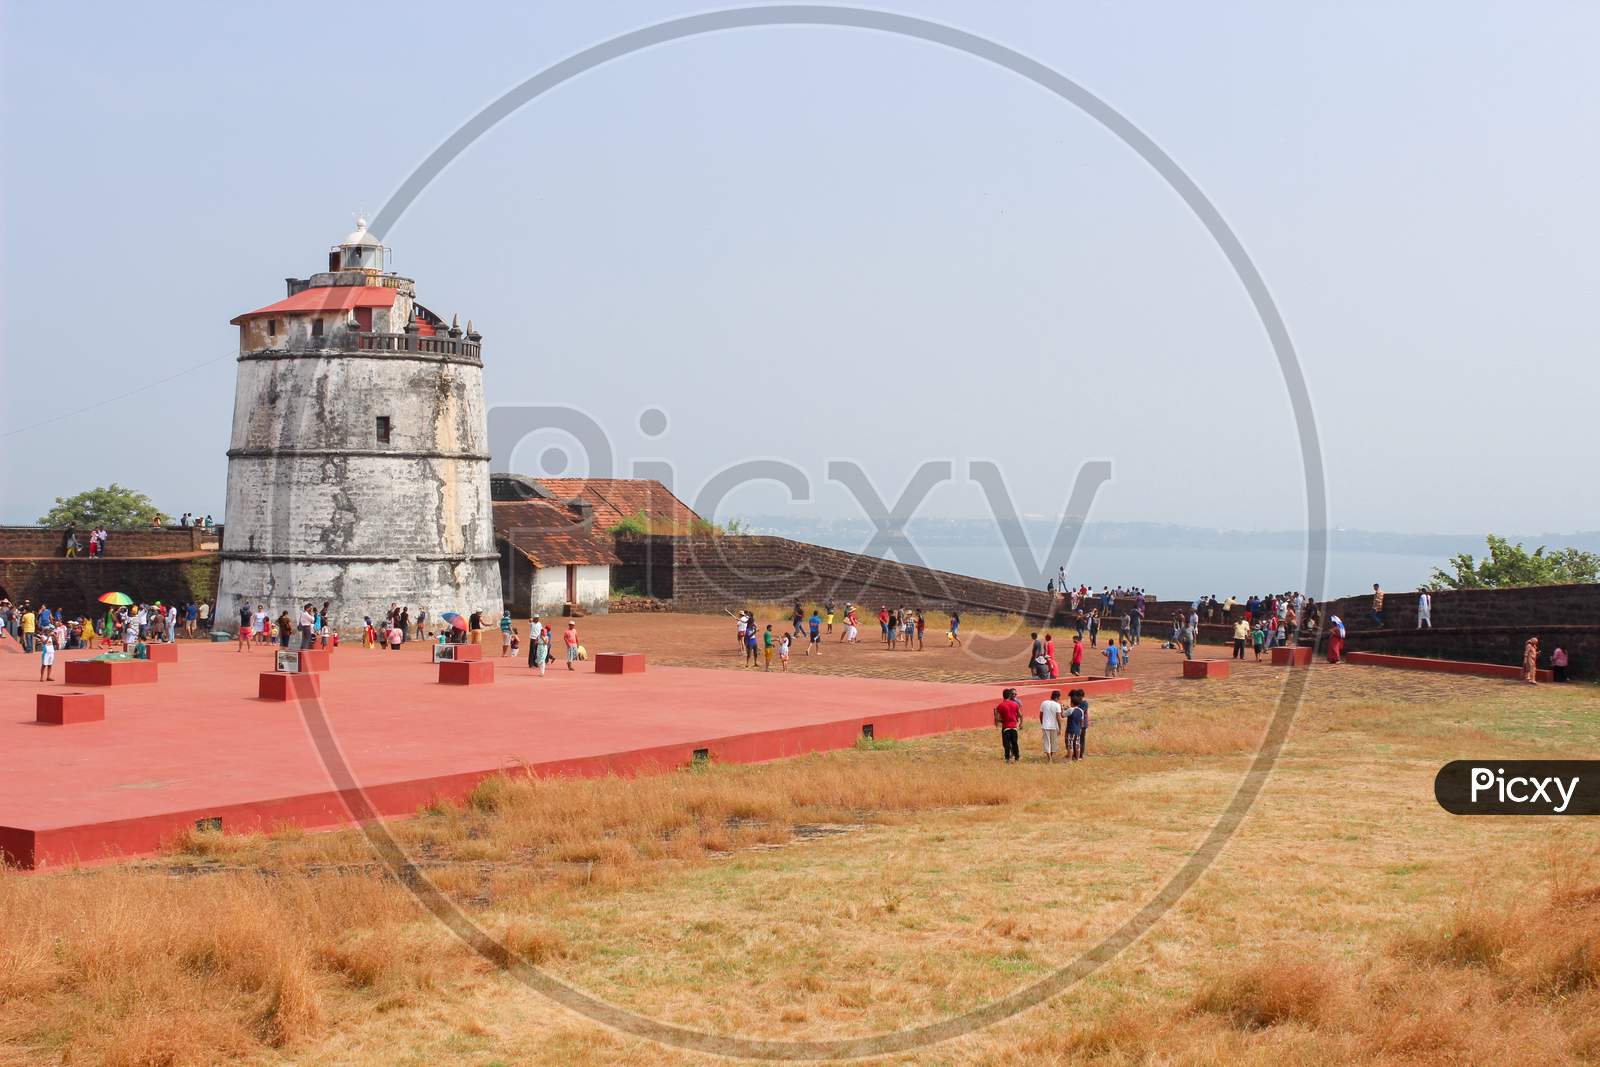 The famous Aguada fort Lighthouse near Panjim in Goa/India.